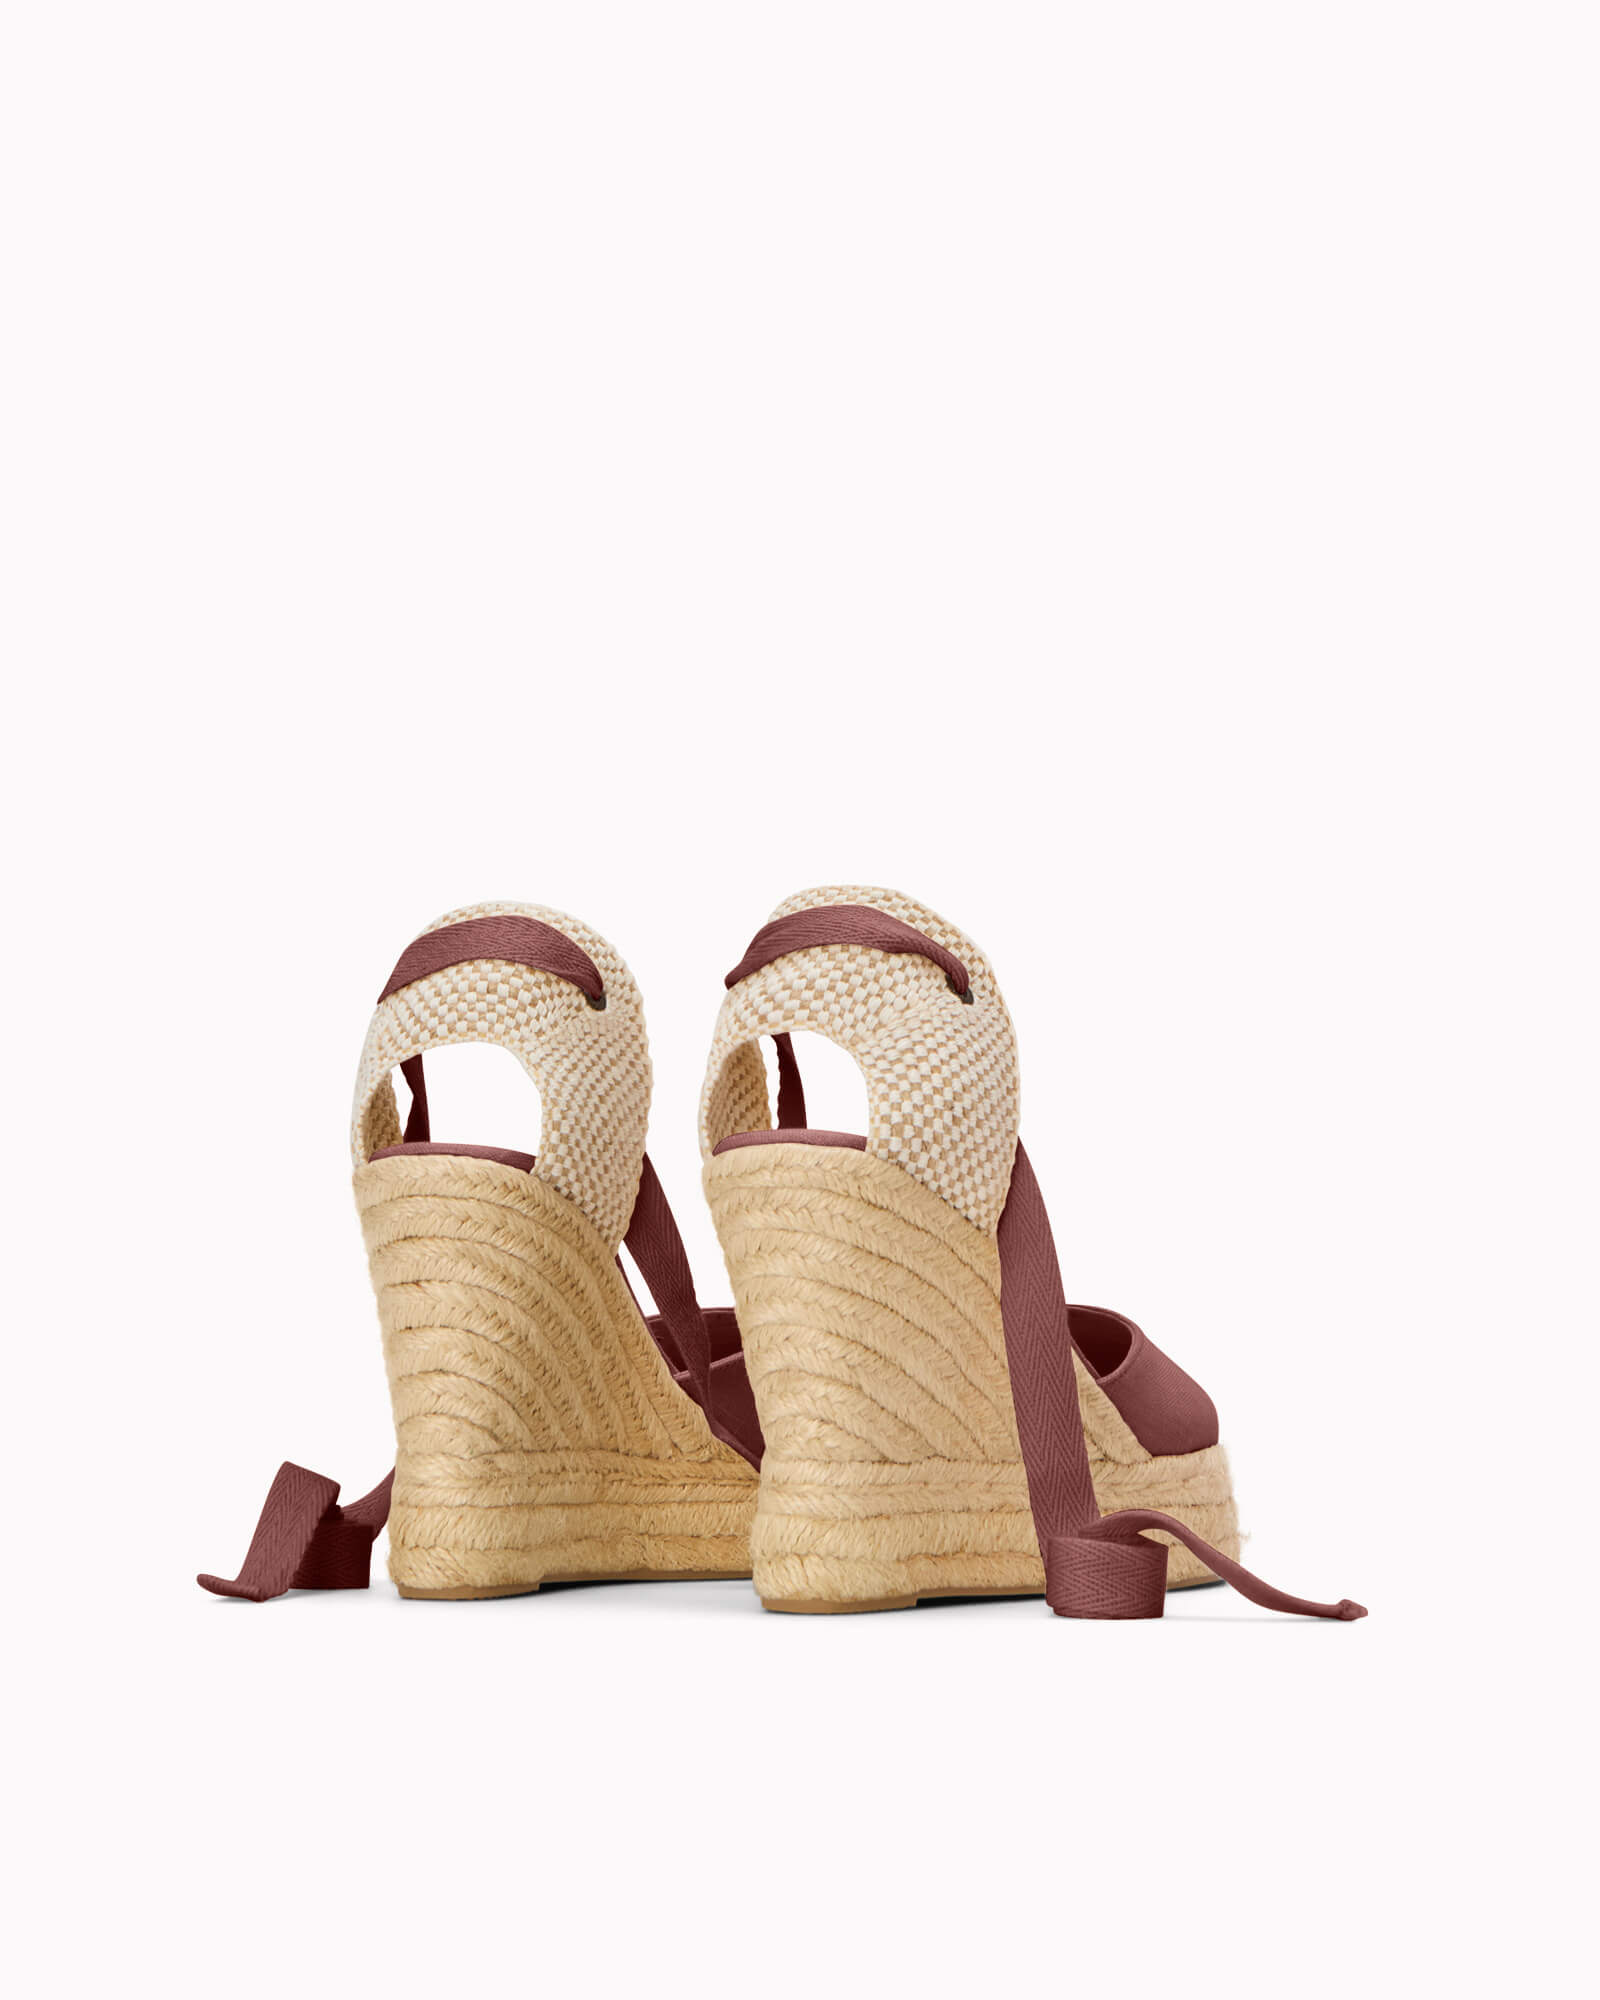 The Platform Wedge - Classic - Castano Brown